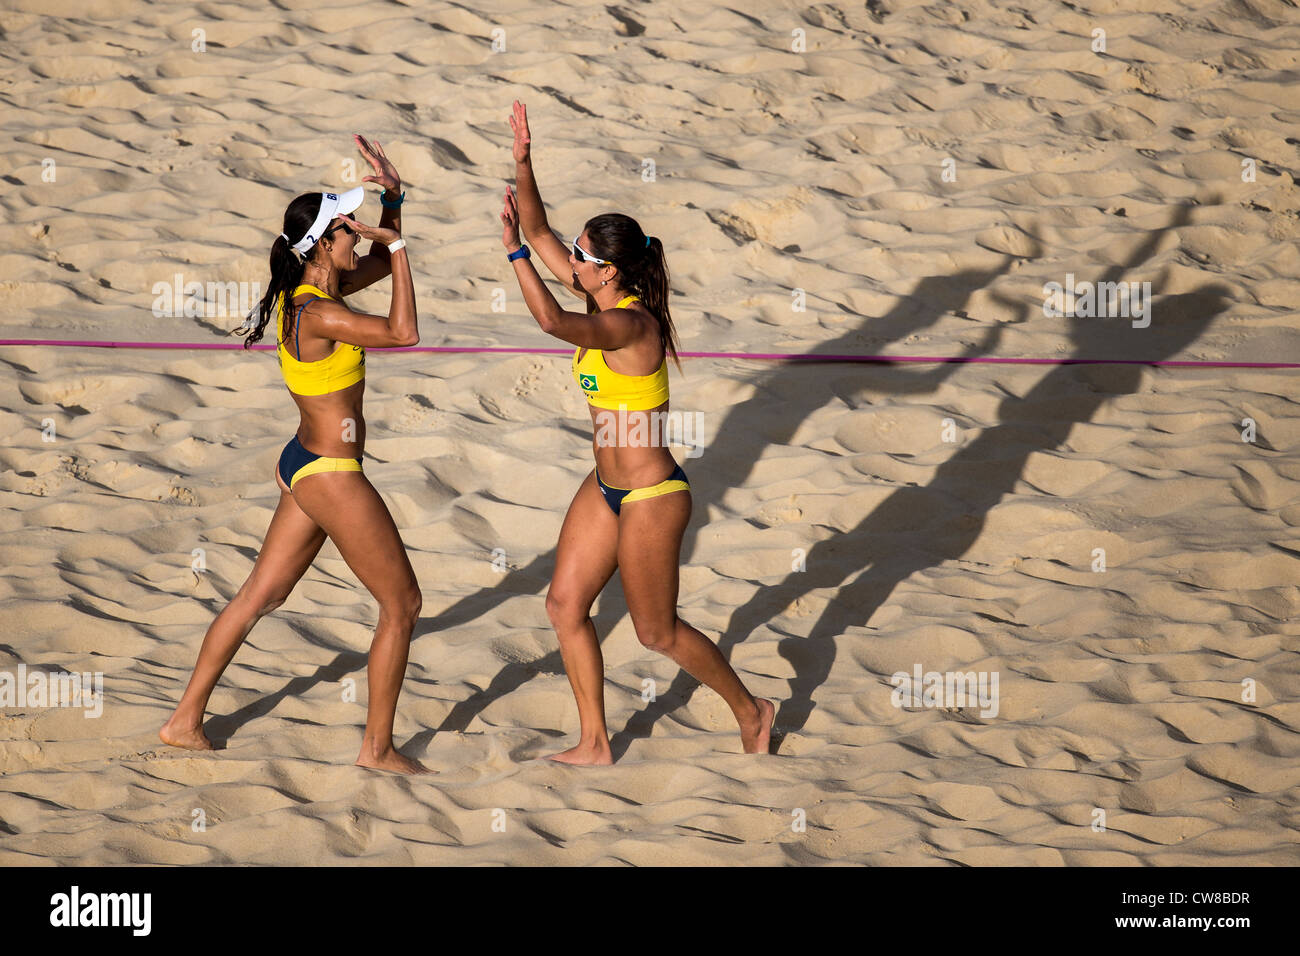 Maria Antonelli-R-and Talita Rocha (BRA) competing in Beach Volleyball at  the Olympic Summer Games, London 2012 Stock Photo - Alamy